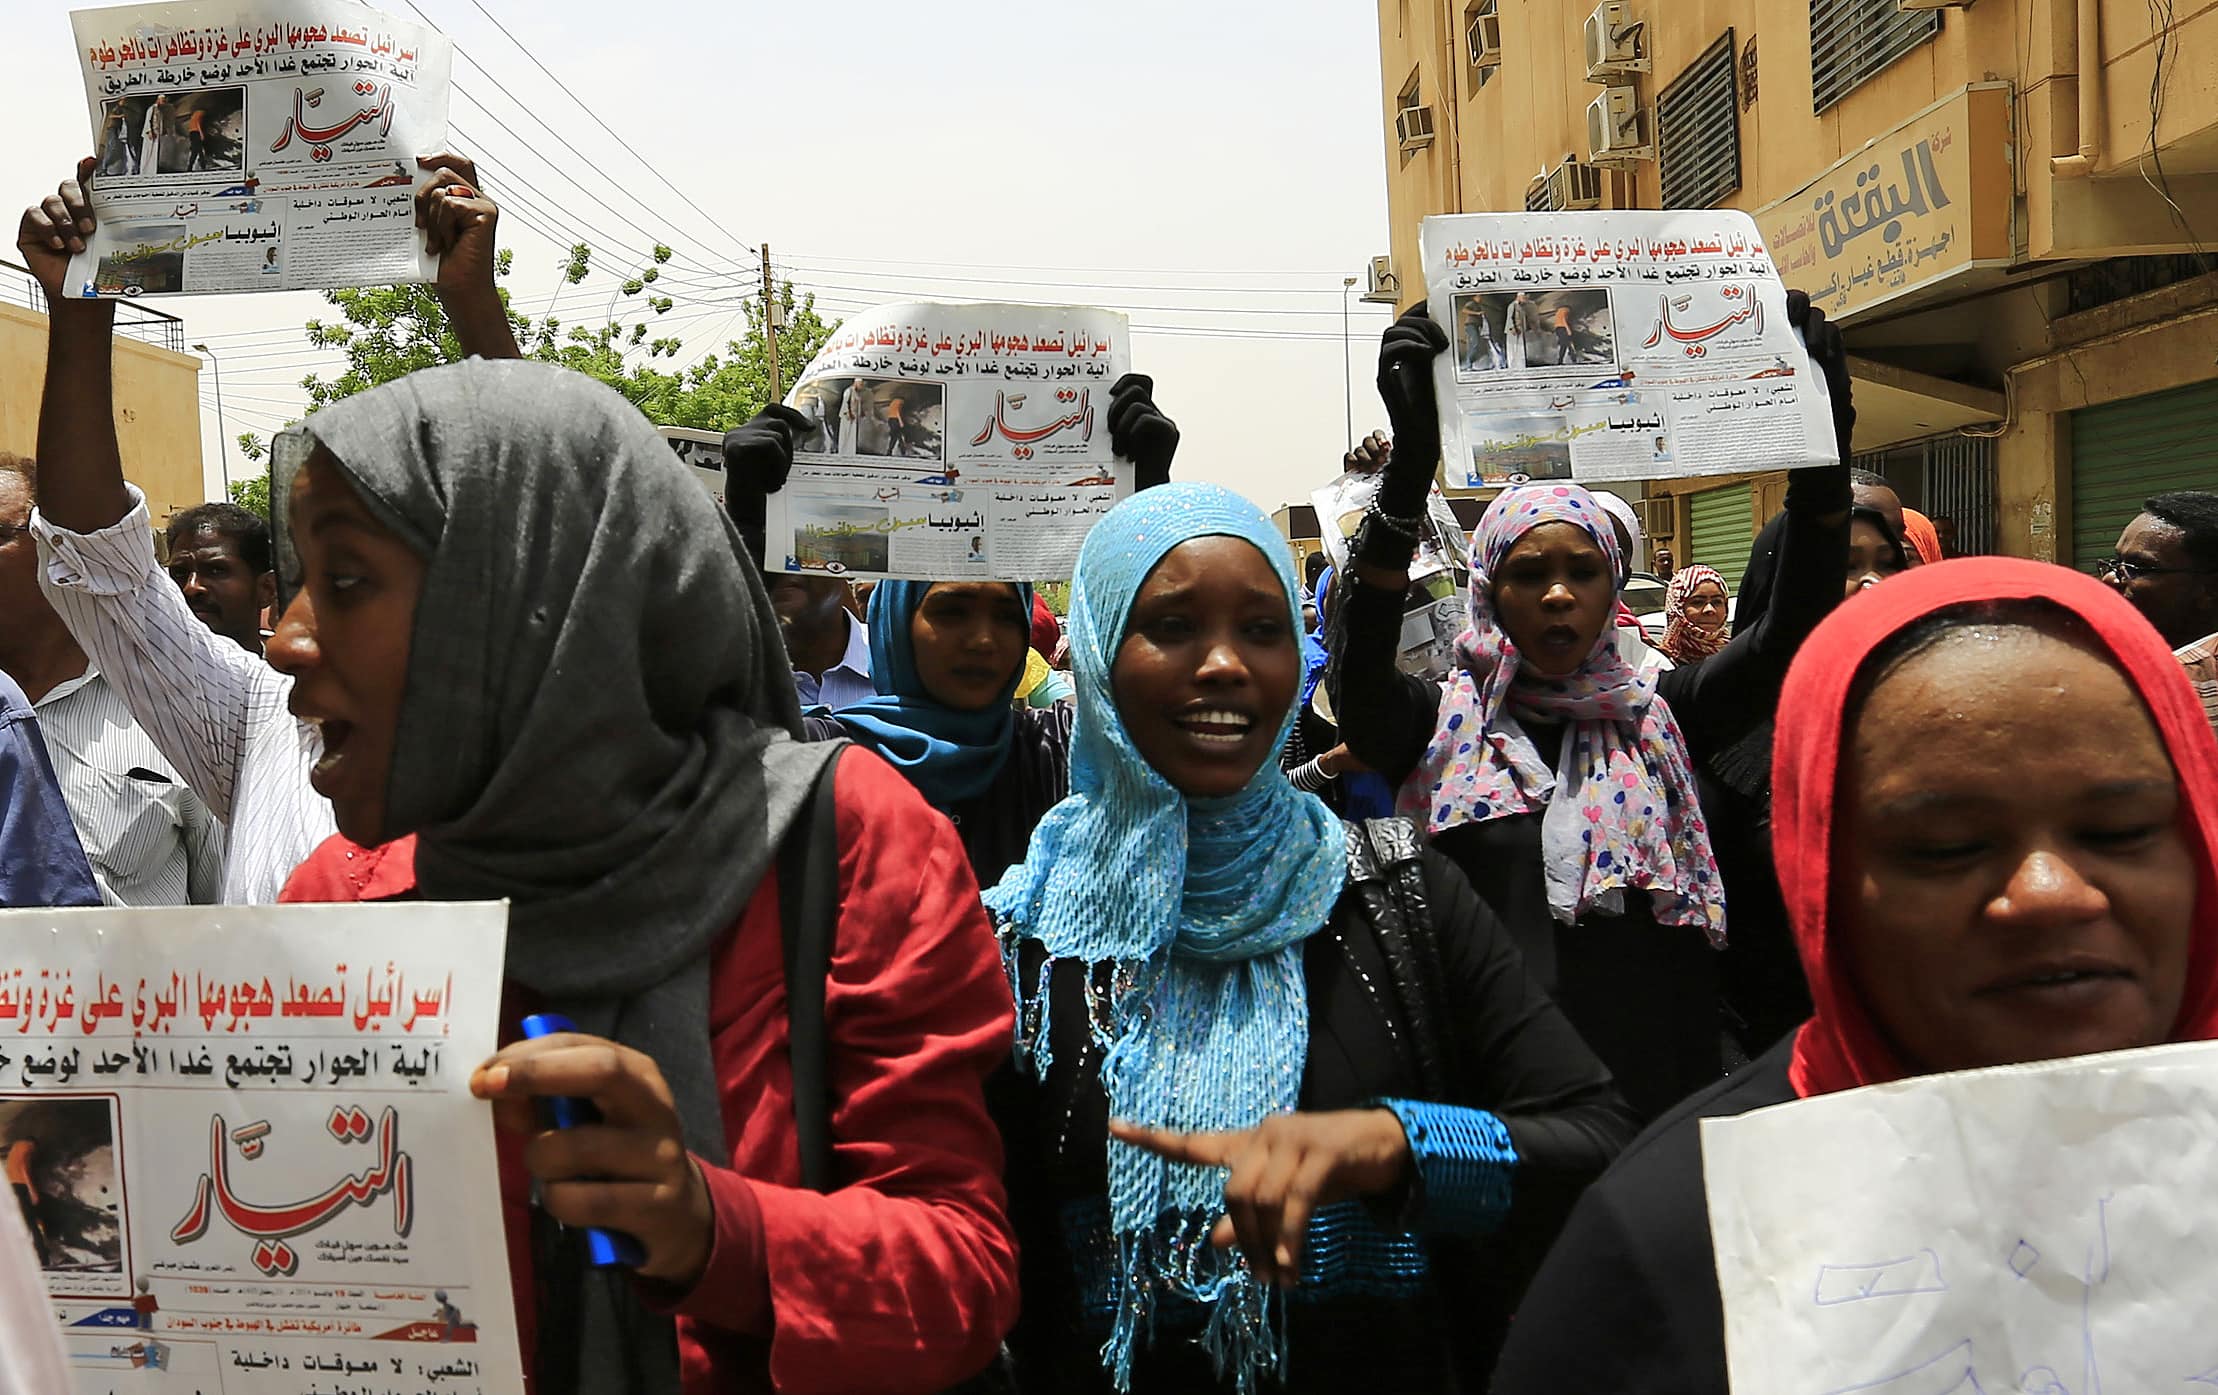 Journalists carry copies of the Al-Tayar daily Sudanese newspaper as they protest against an attack on its Editor-in-chief Osman Mirghani, in Khartoum July 20, 2014. , REUTERS/Mohamed Nureldin Abdallah